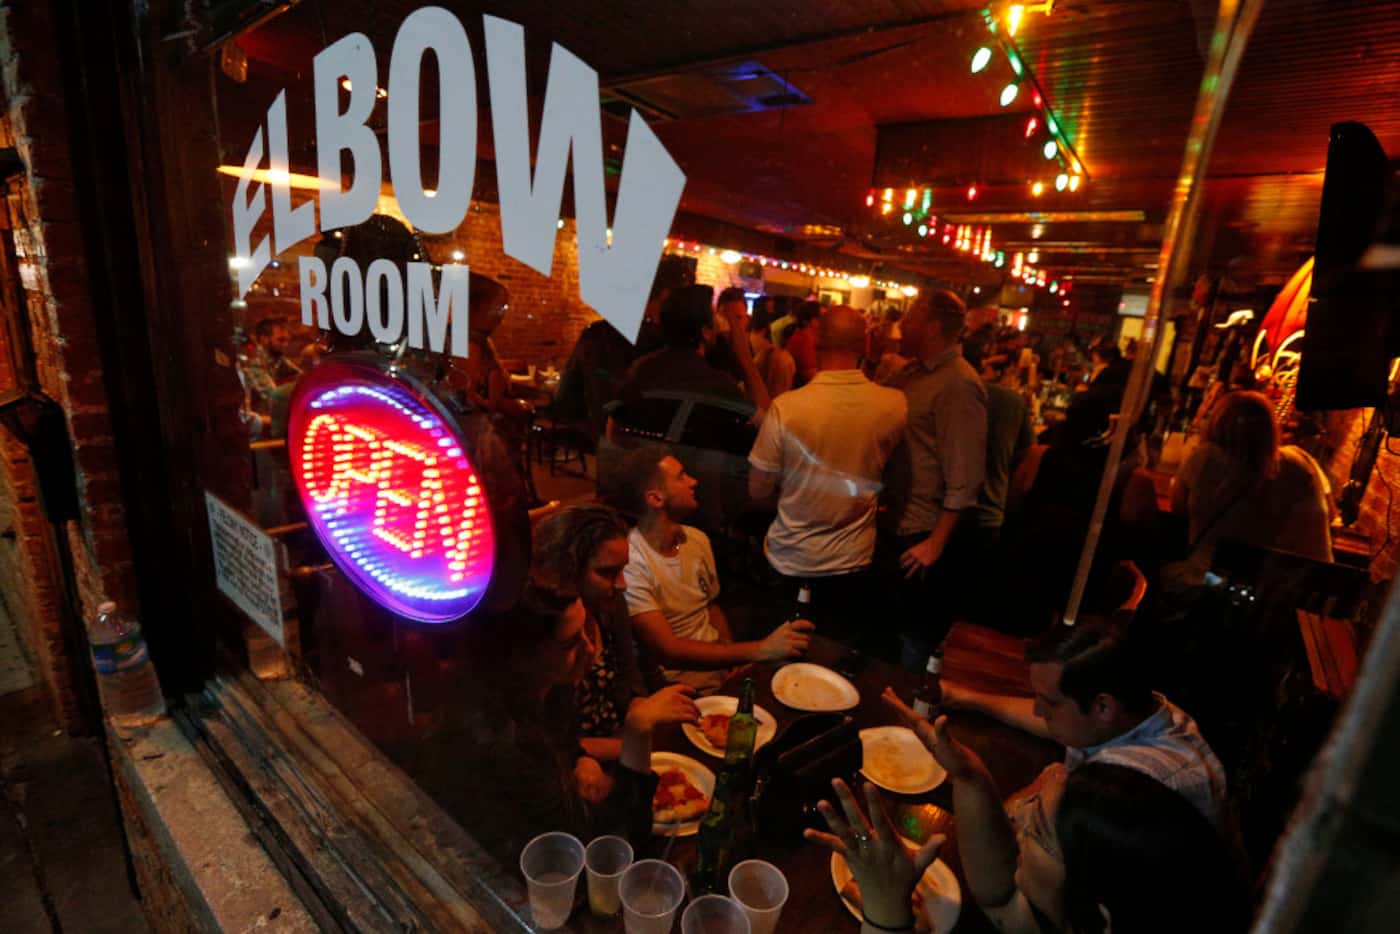 East Dallas' Elbow Room was jammed Saturday night as its final closing approached. (Nathan...